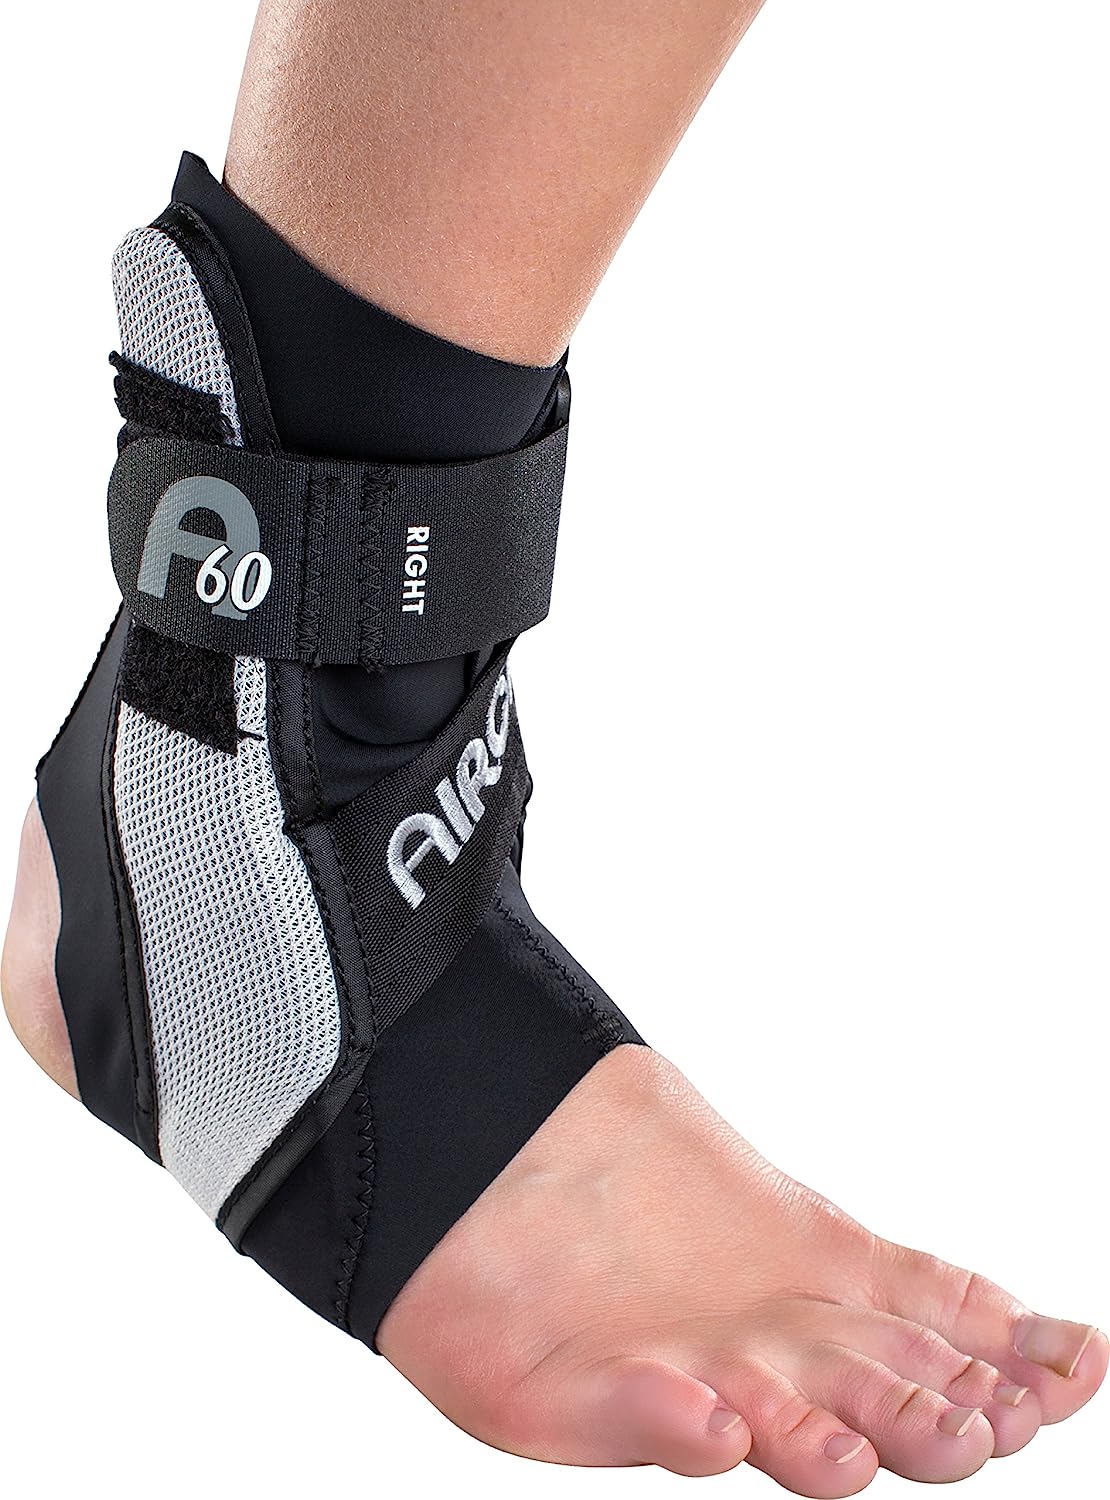 Aircast A60 Ankle Support Black